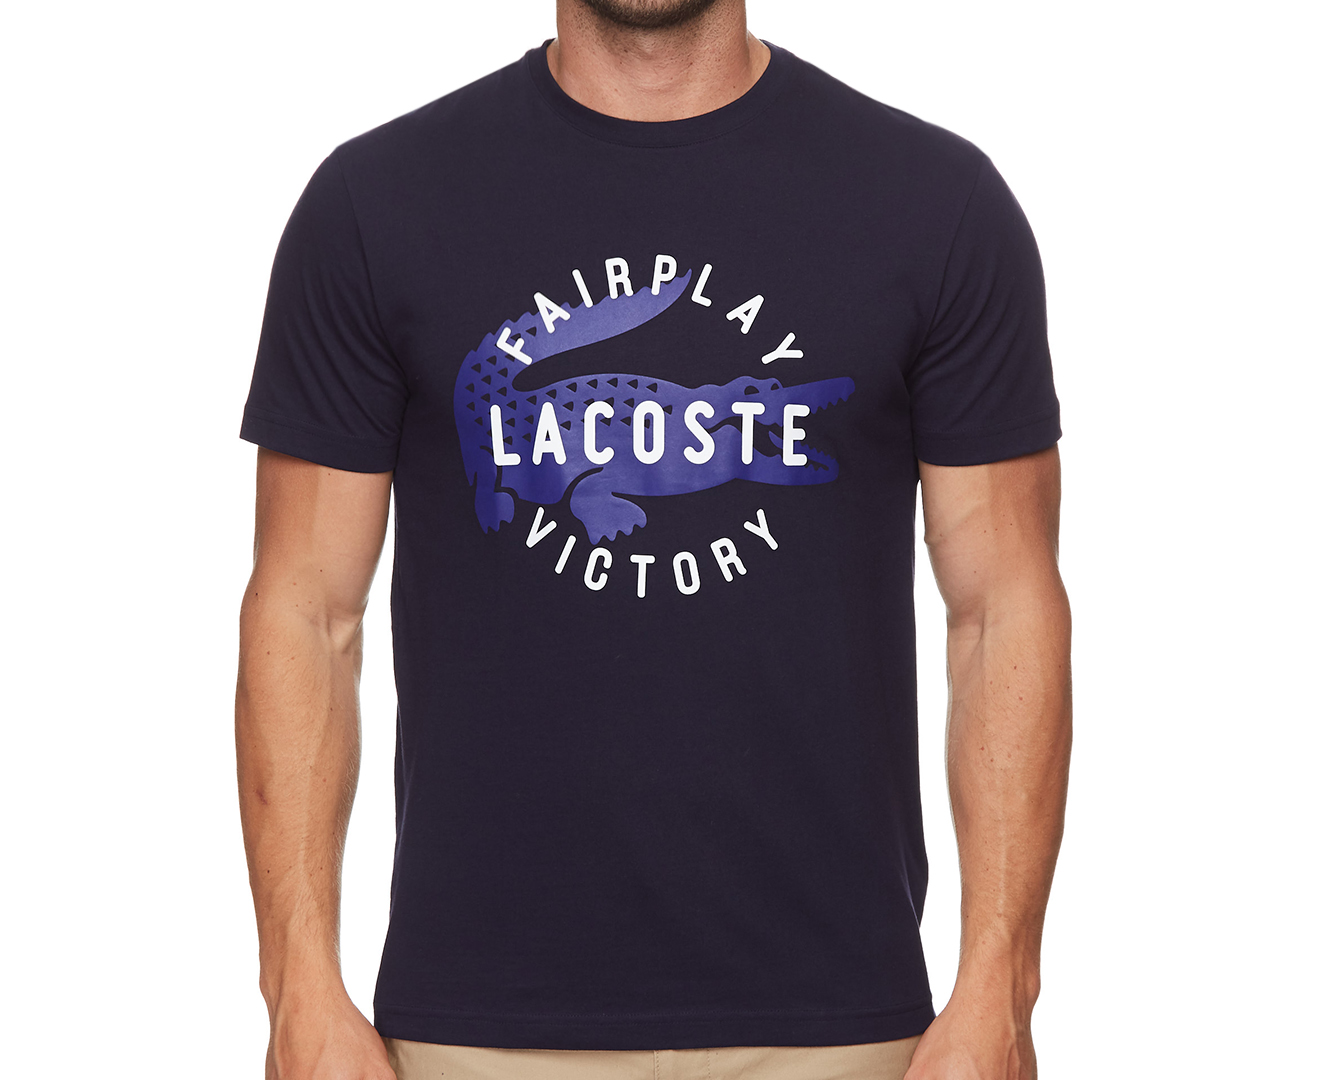 lacoste fairplay t shirt